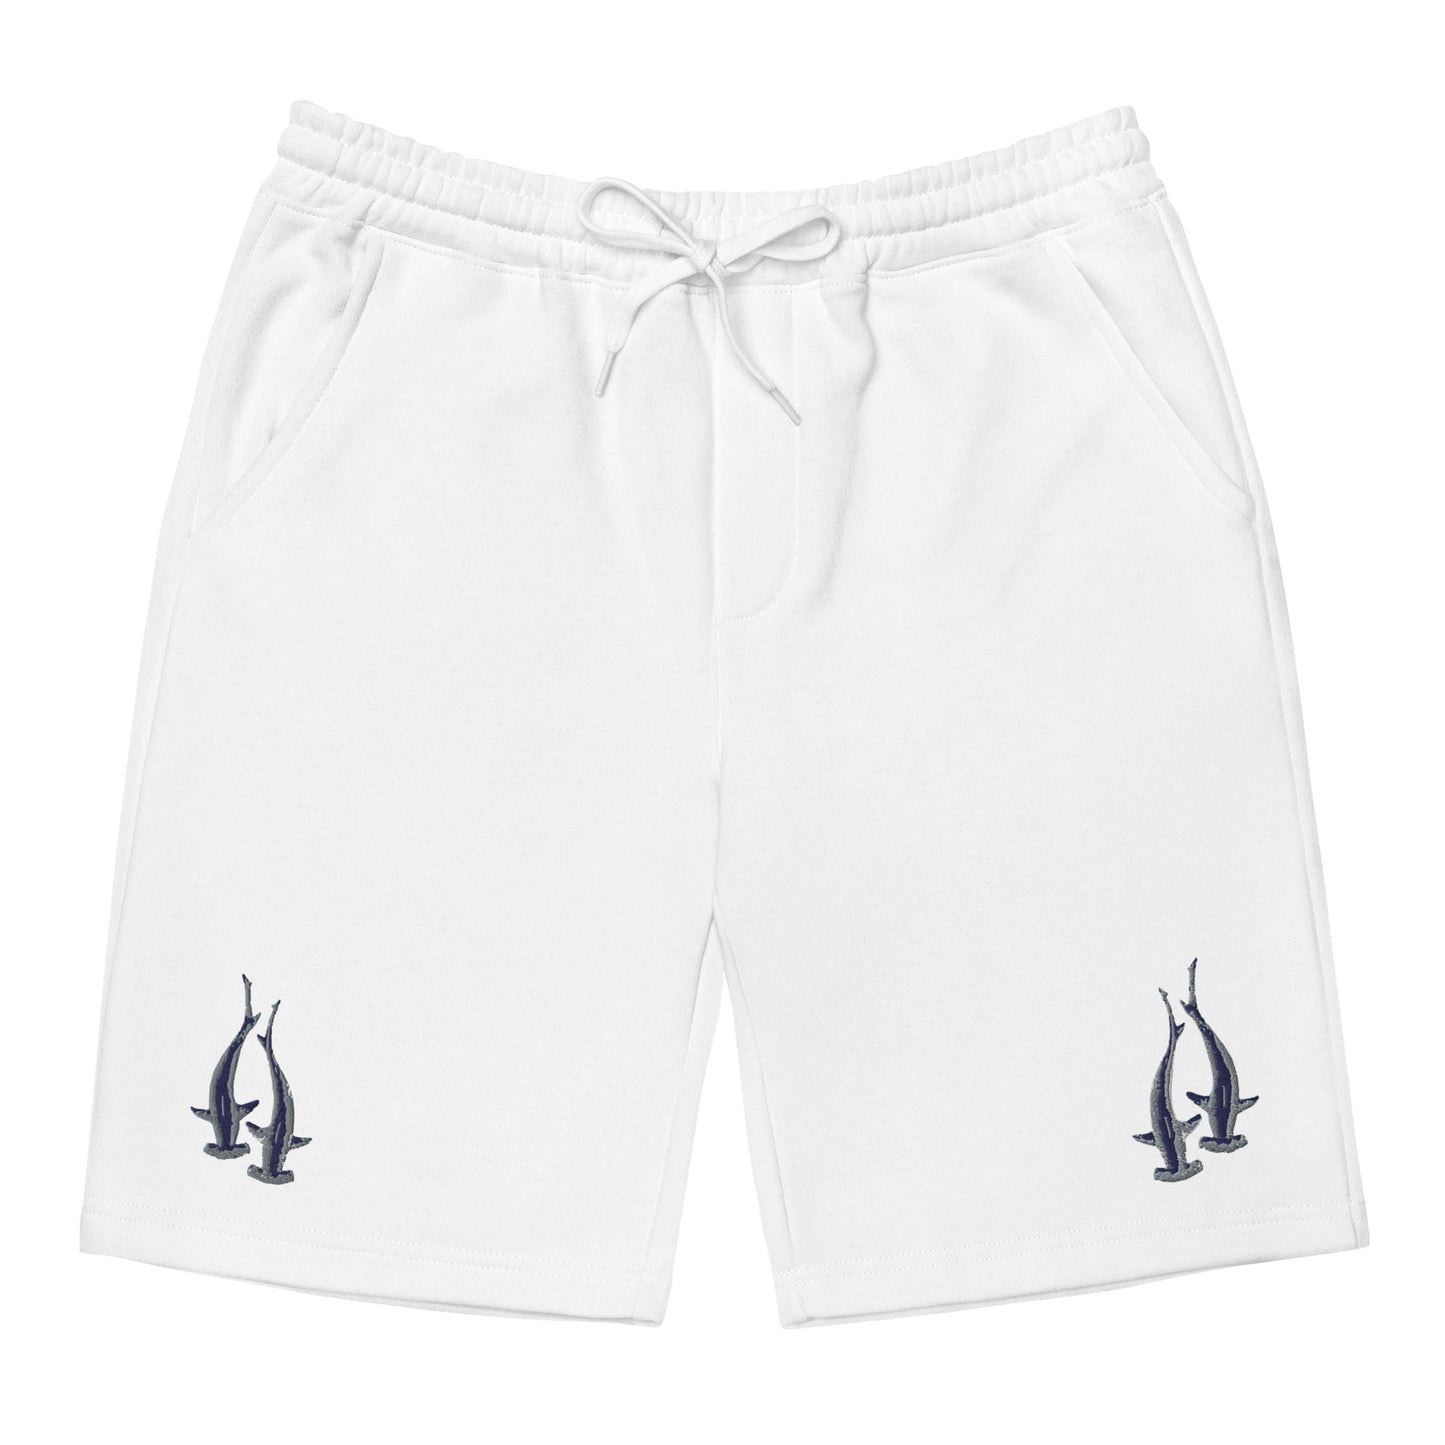 Twin Hammers Men's Embroidered Shorts